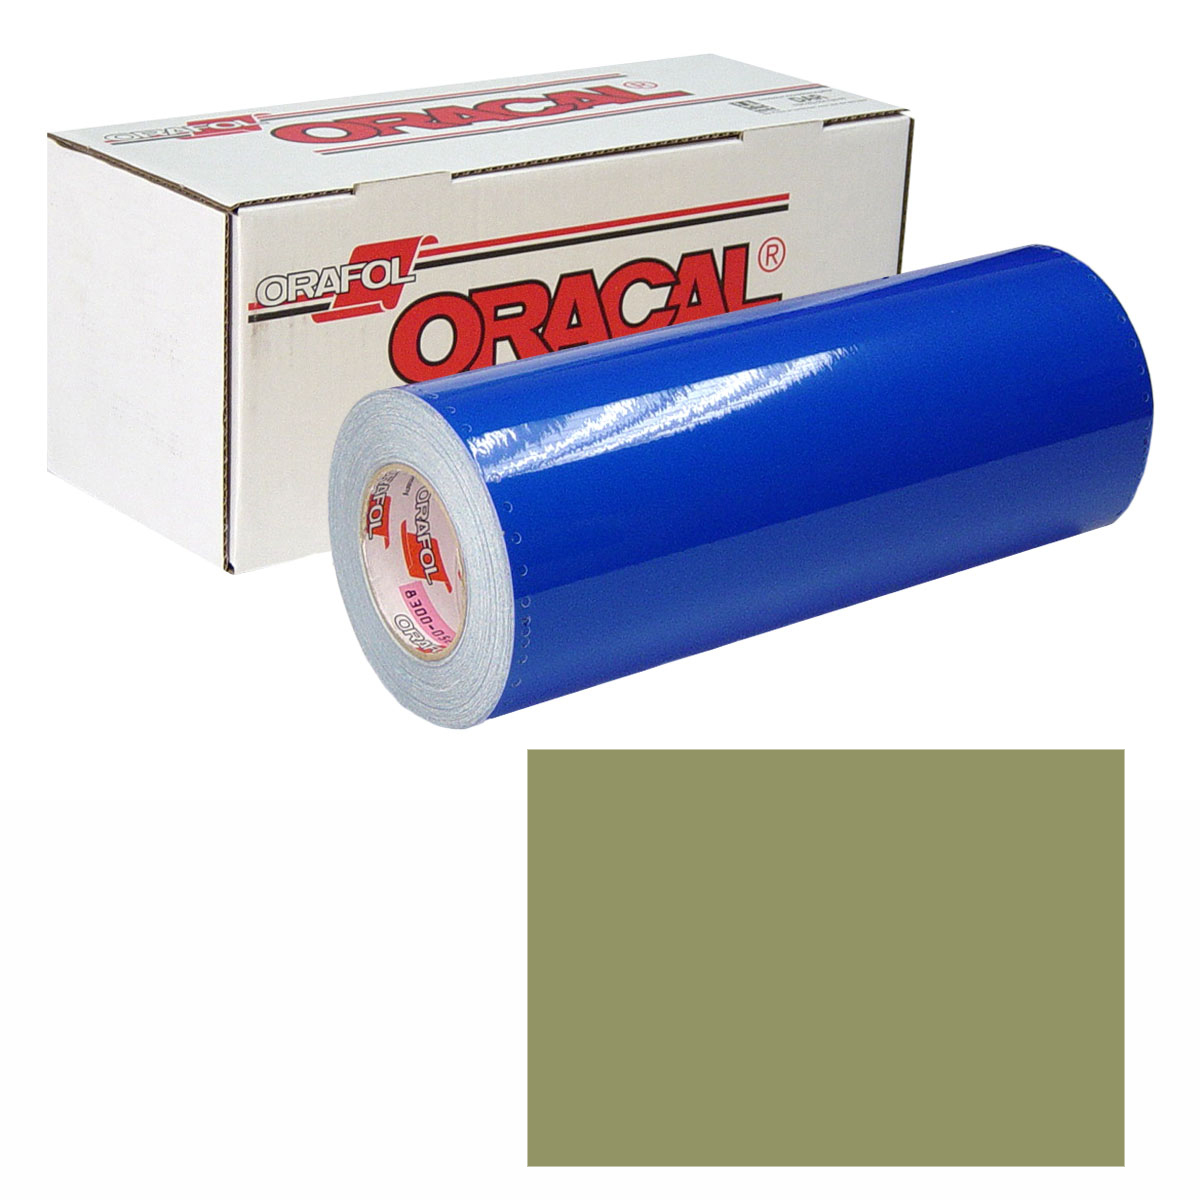 ORACAL 631 15in X 50yd 493 Olive